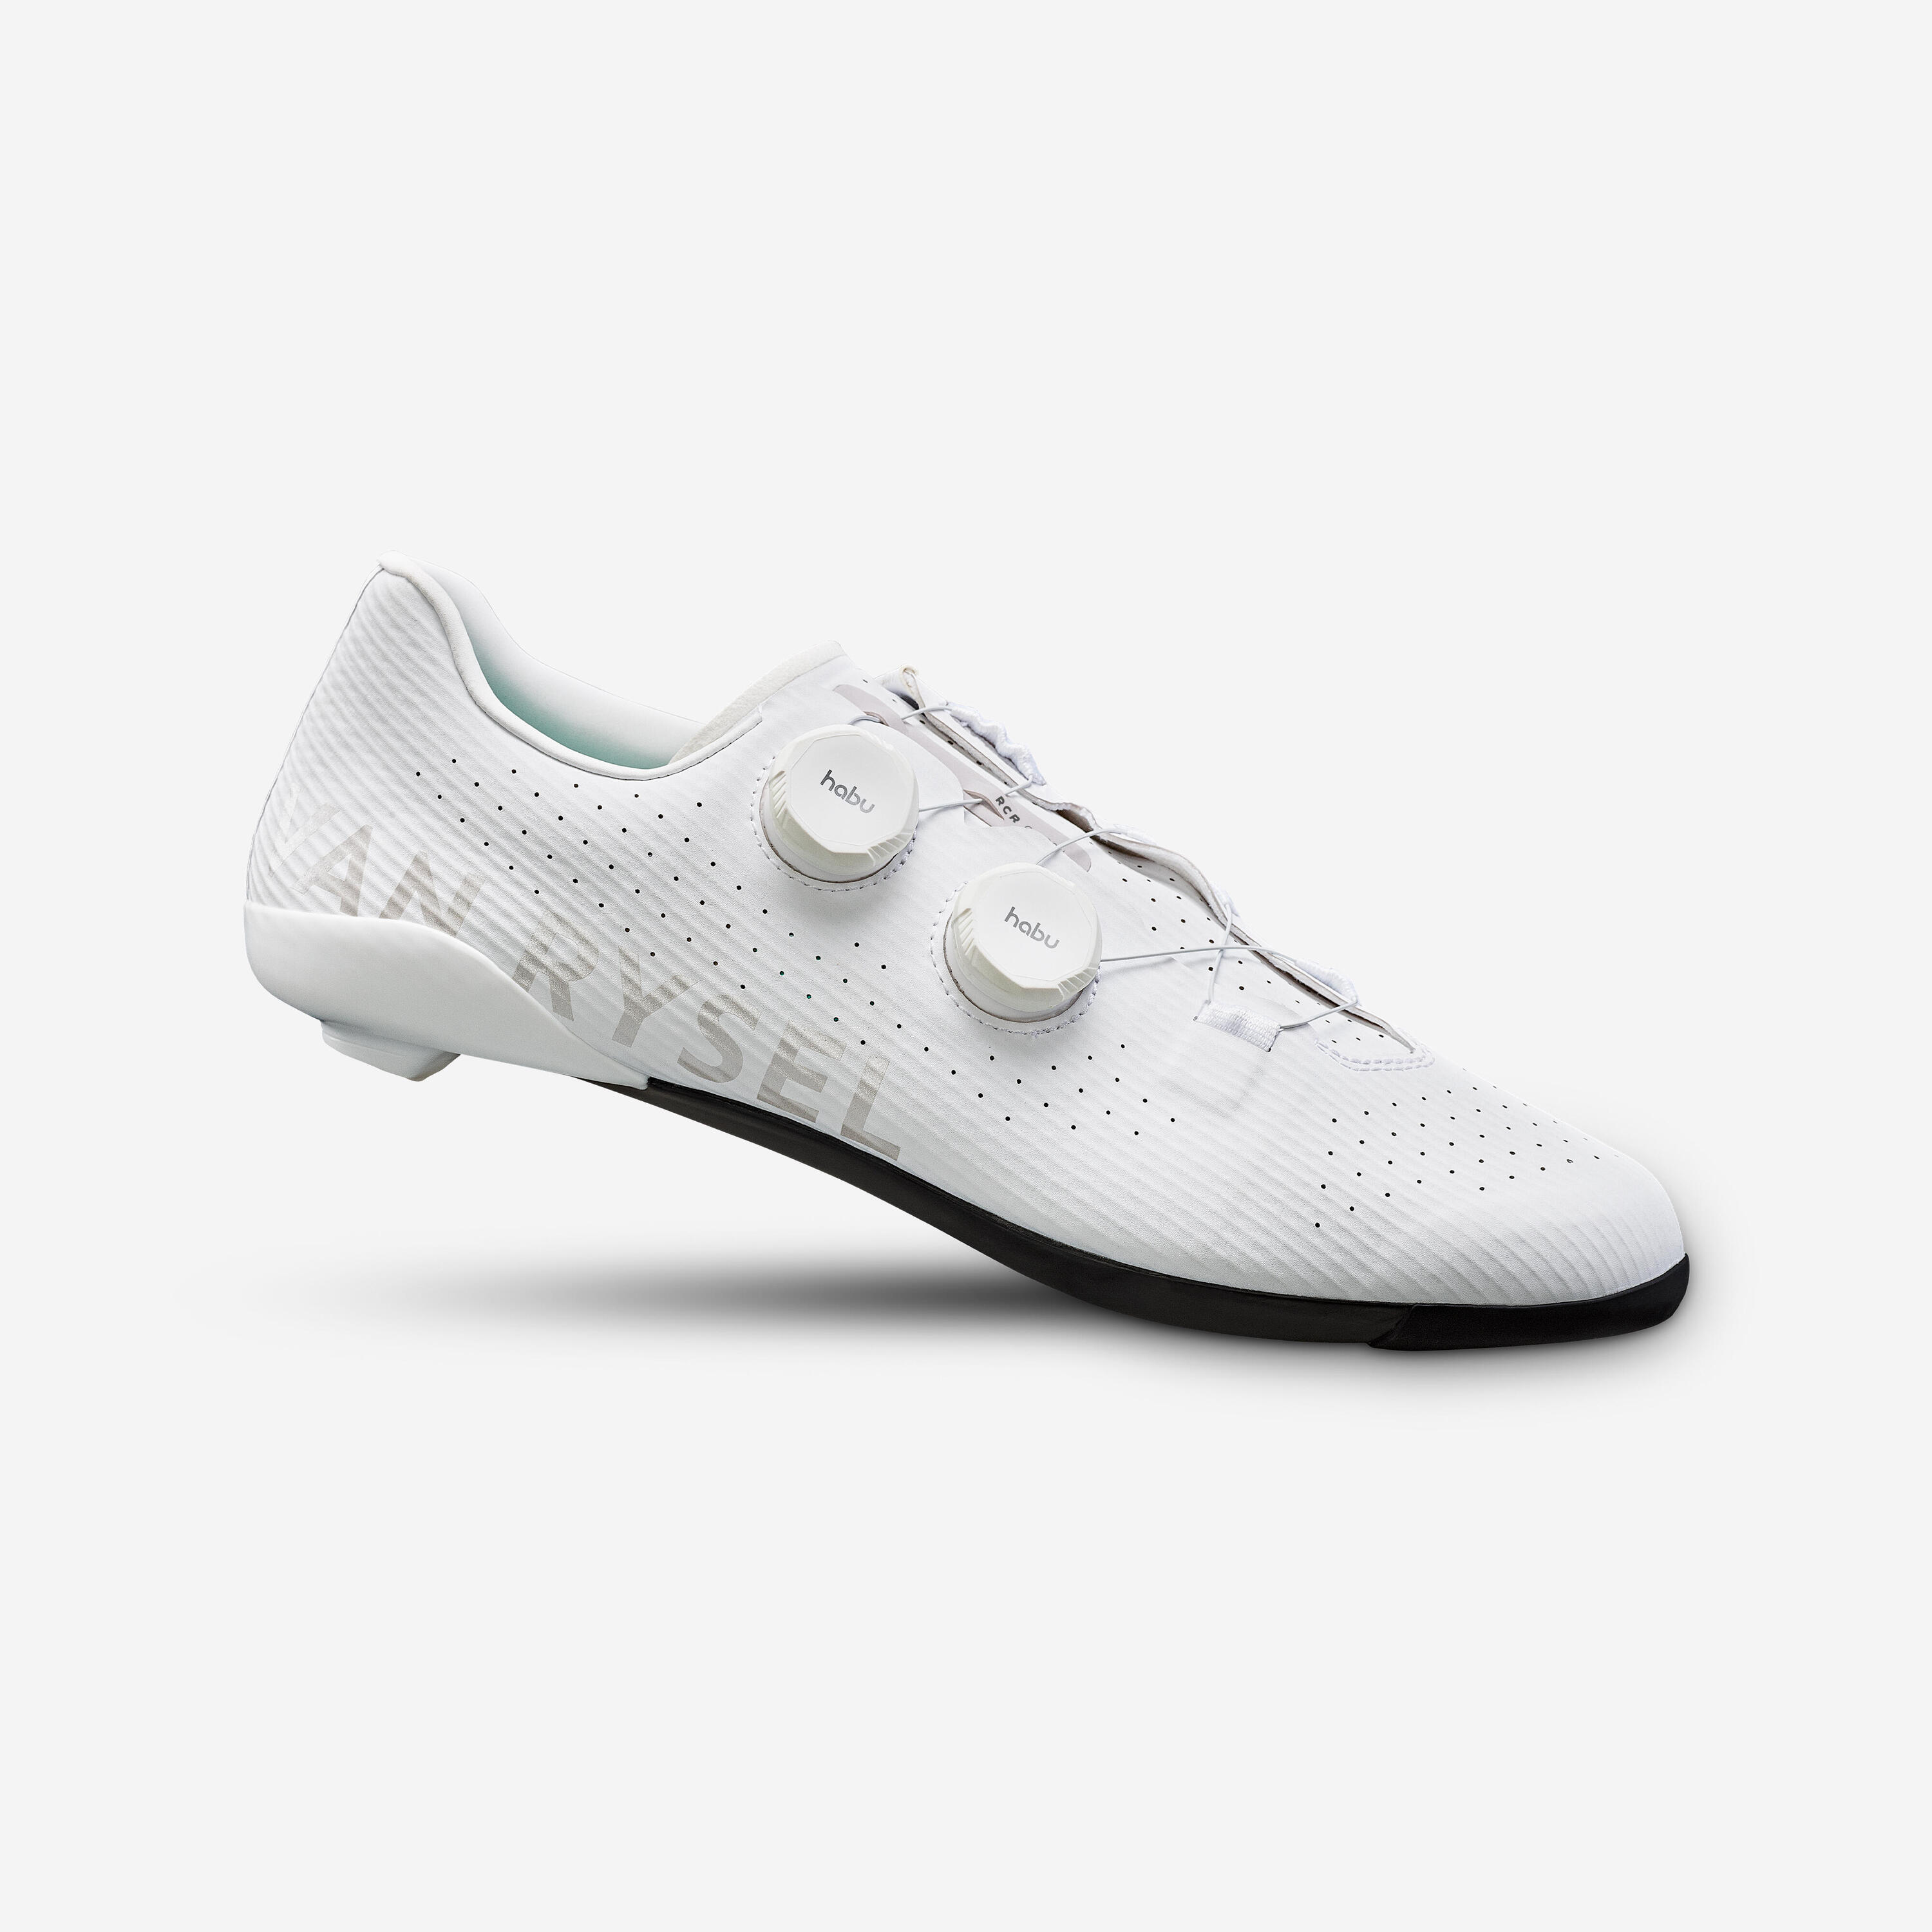 Road Cycling Shoes RCR - White 1/9